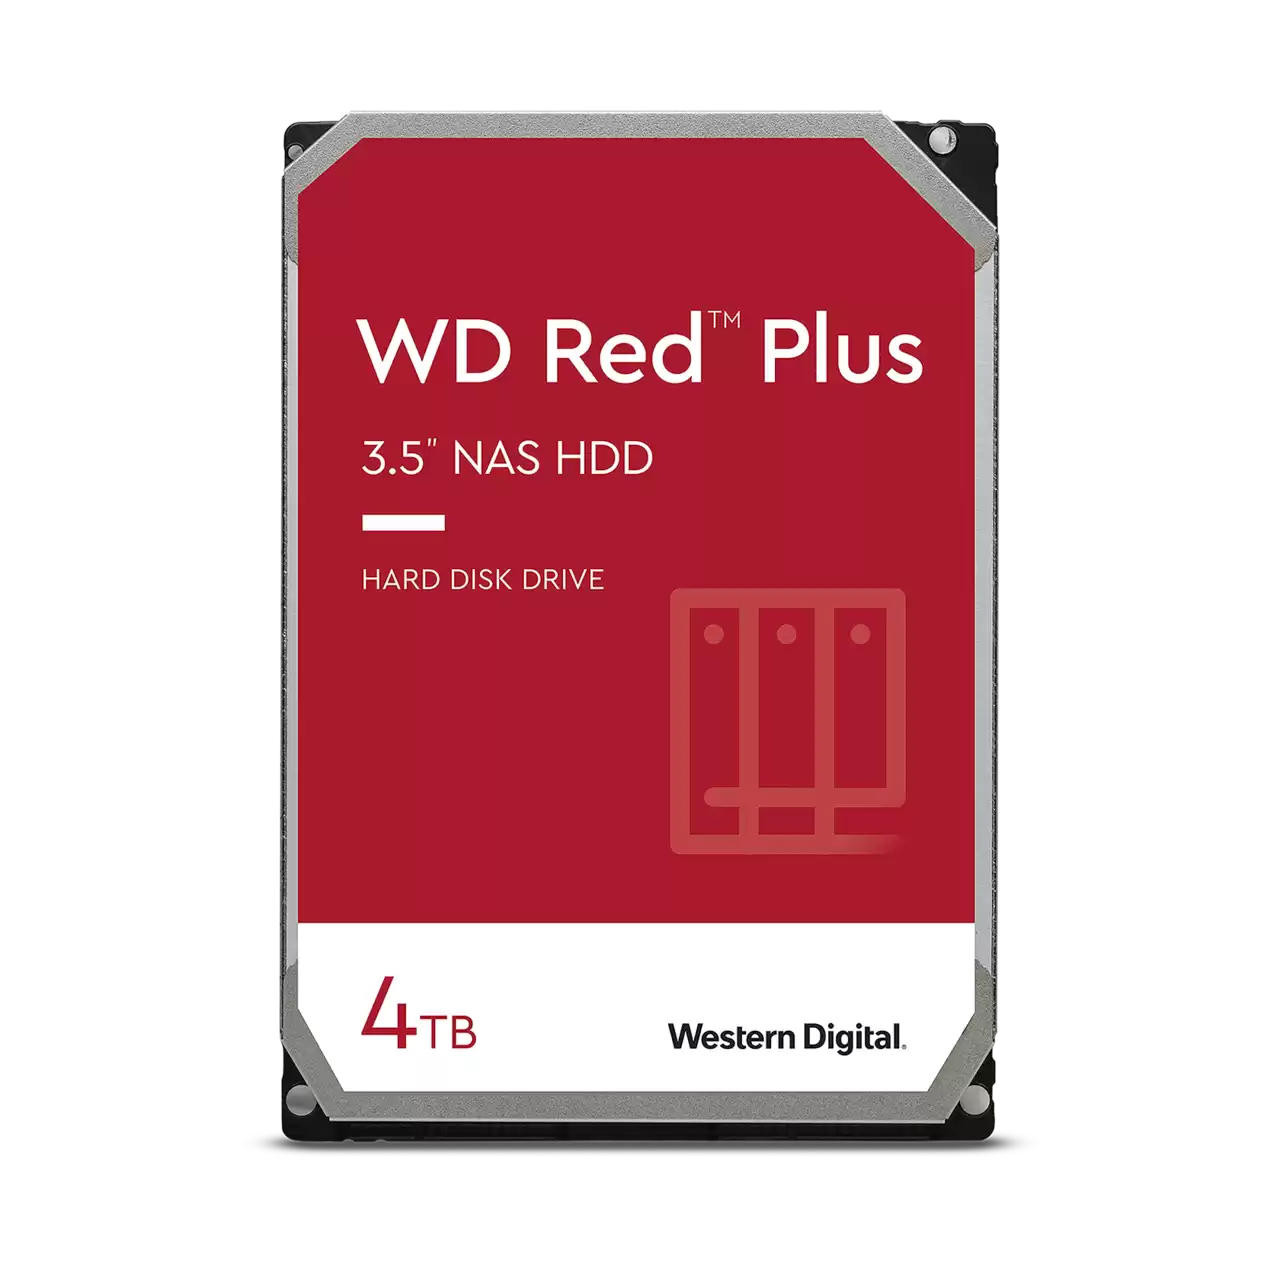 WD Red Plus 4TB WD40EFPX